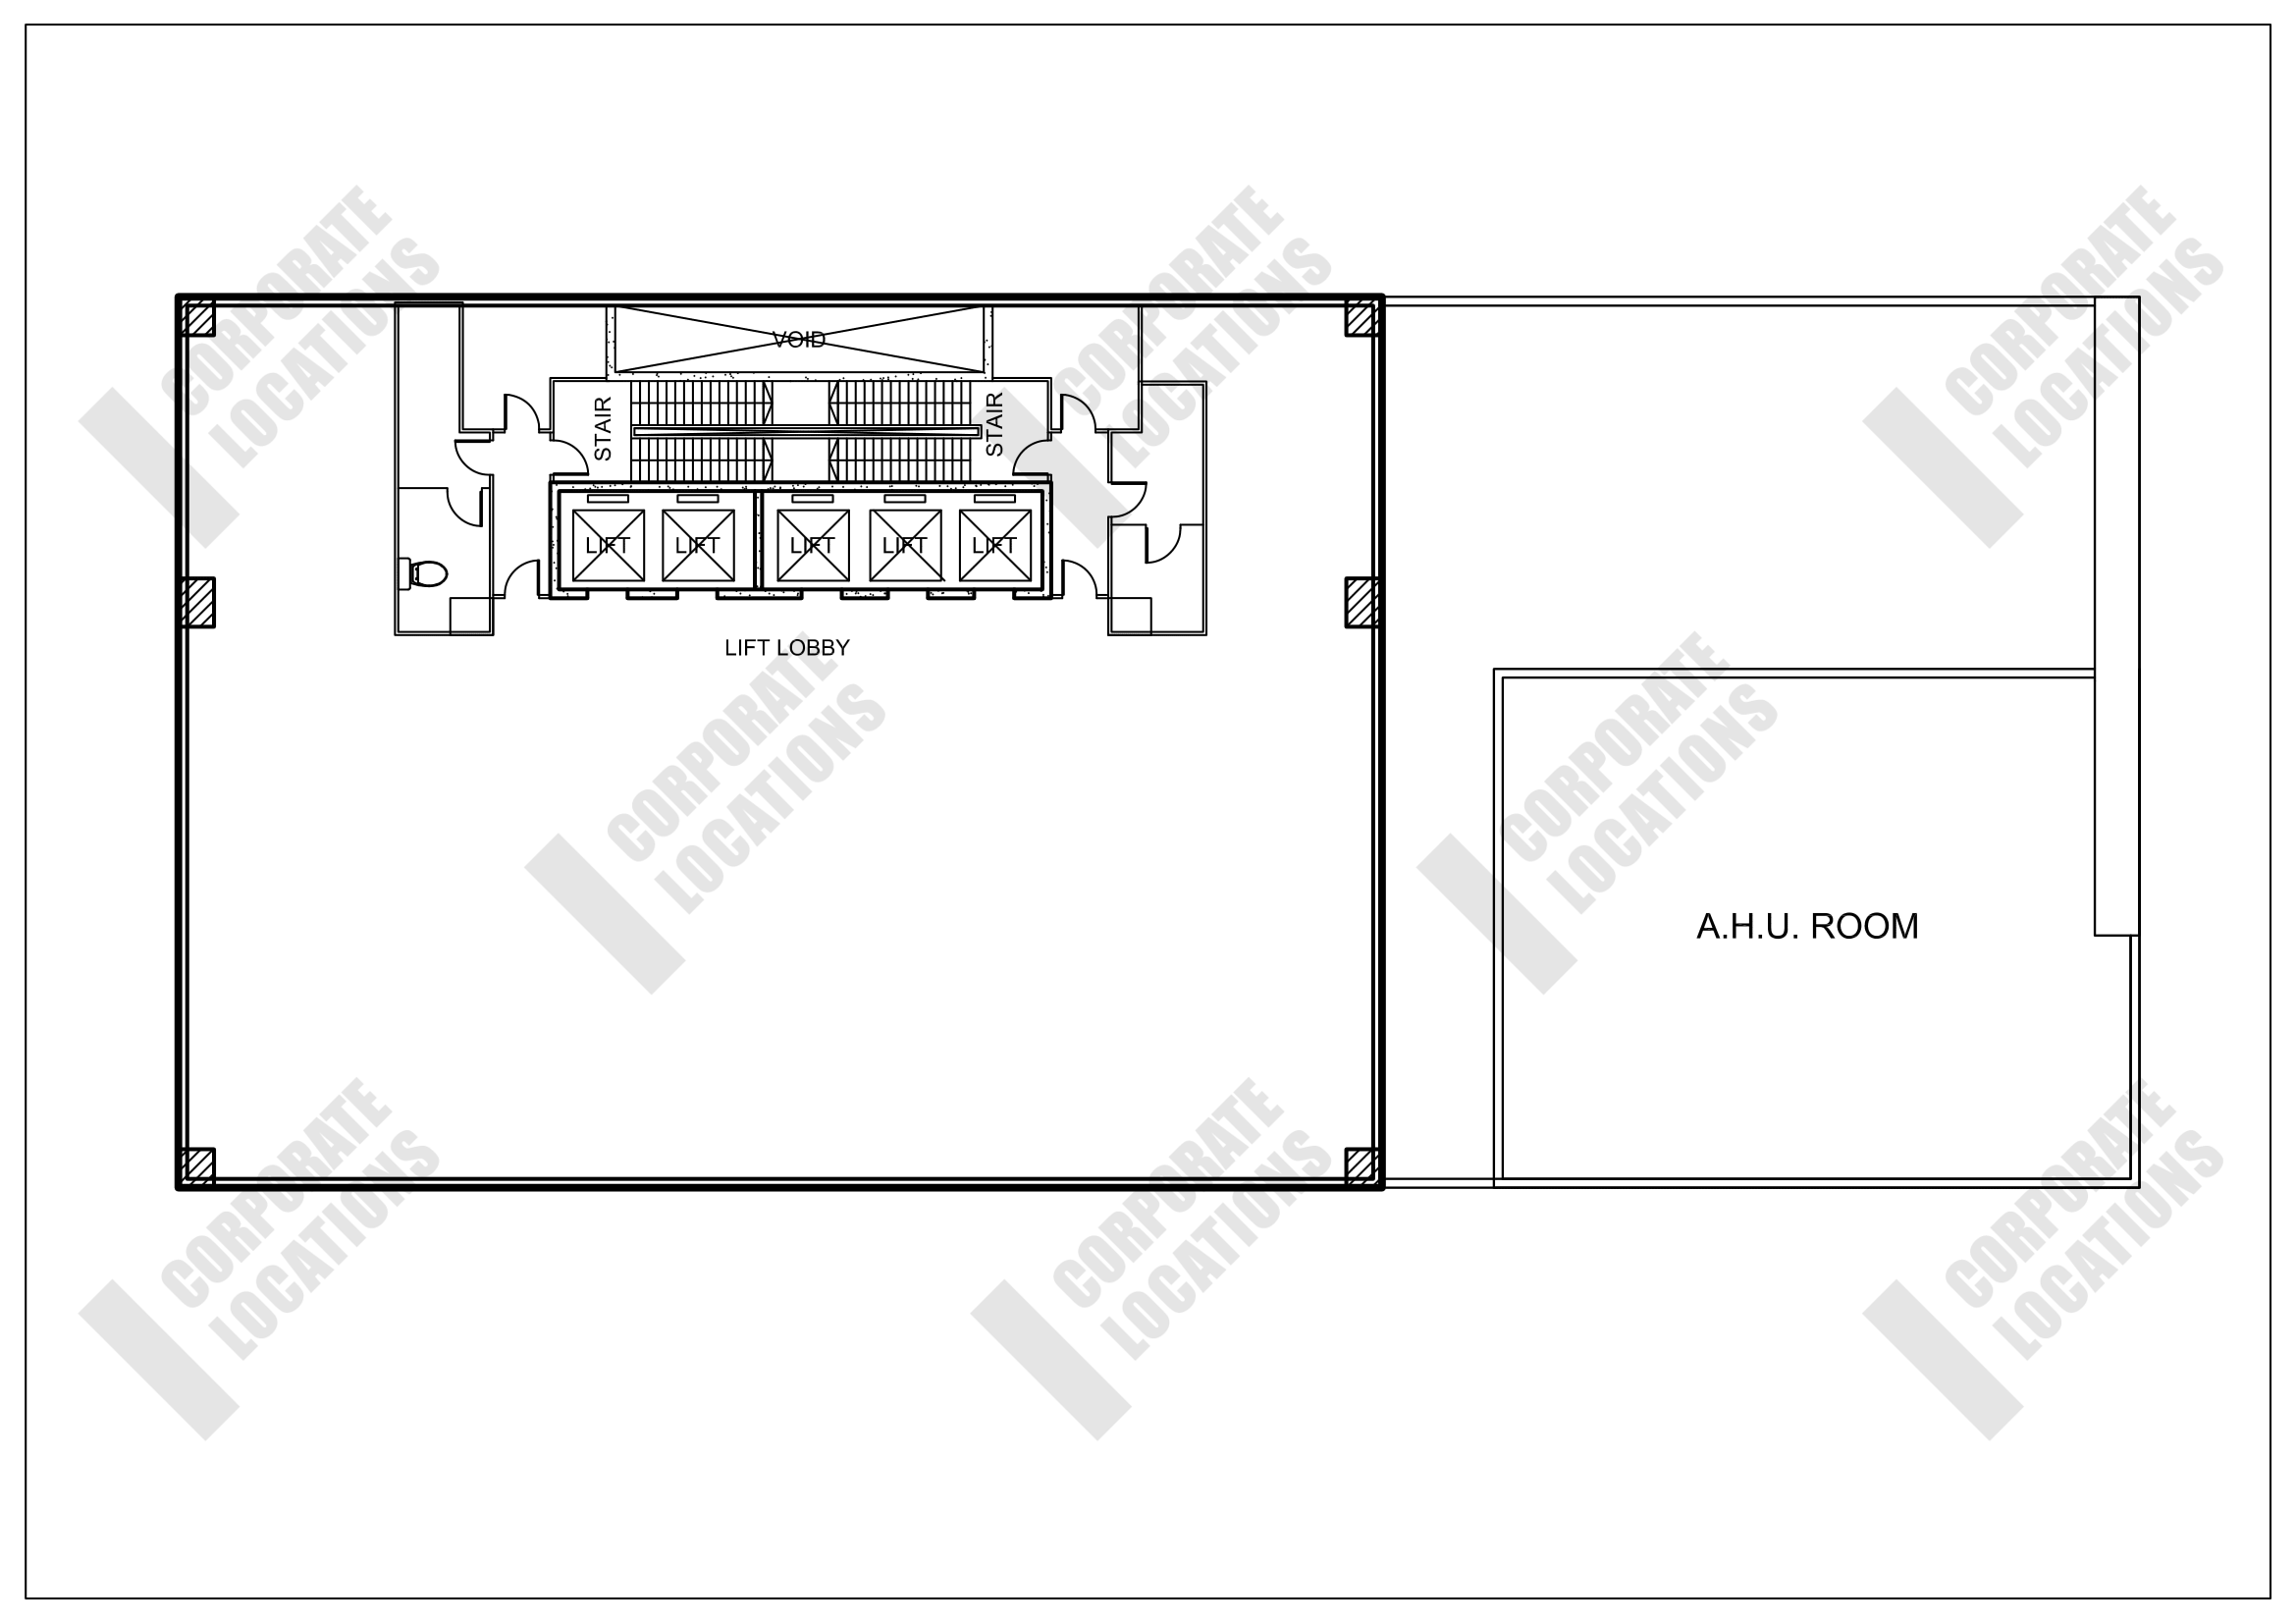 Floorplan Guangdong Investment Building